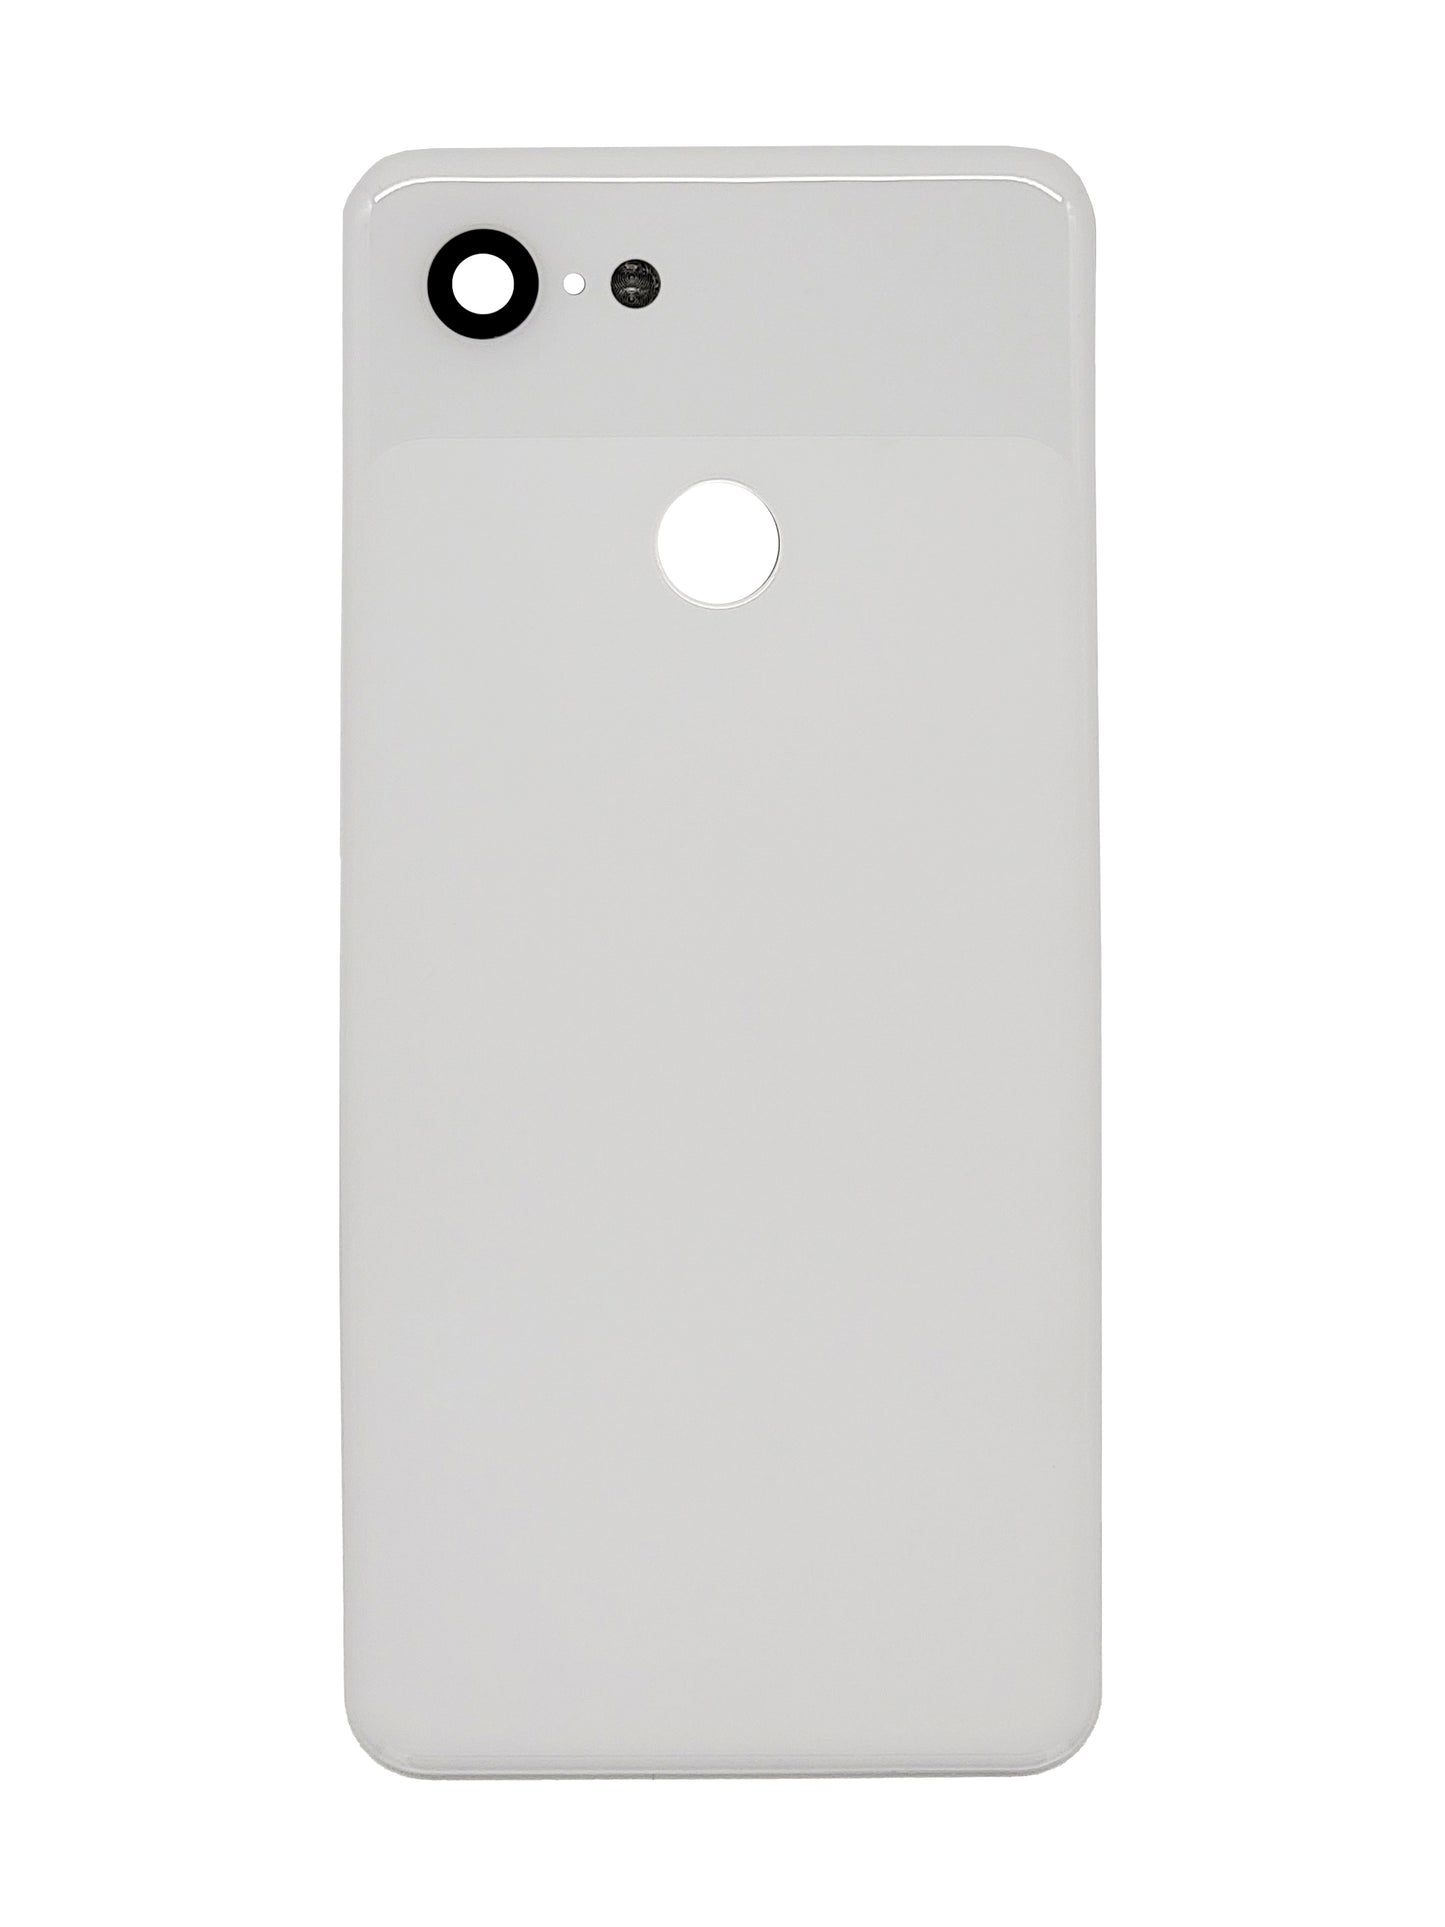 GOP Pixel 3 Back Cover (White)